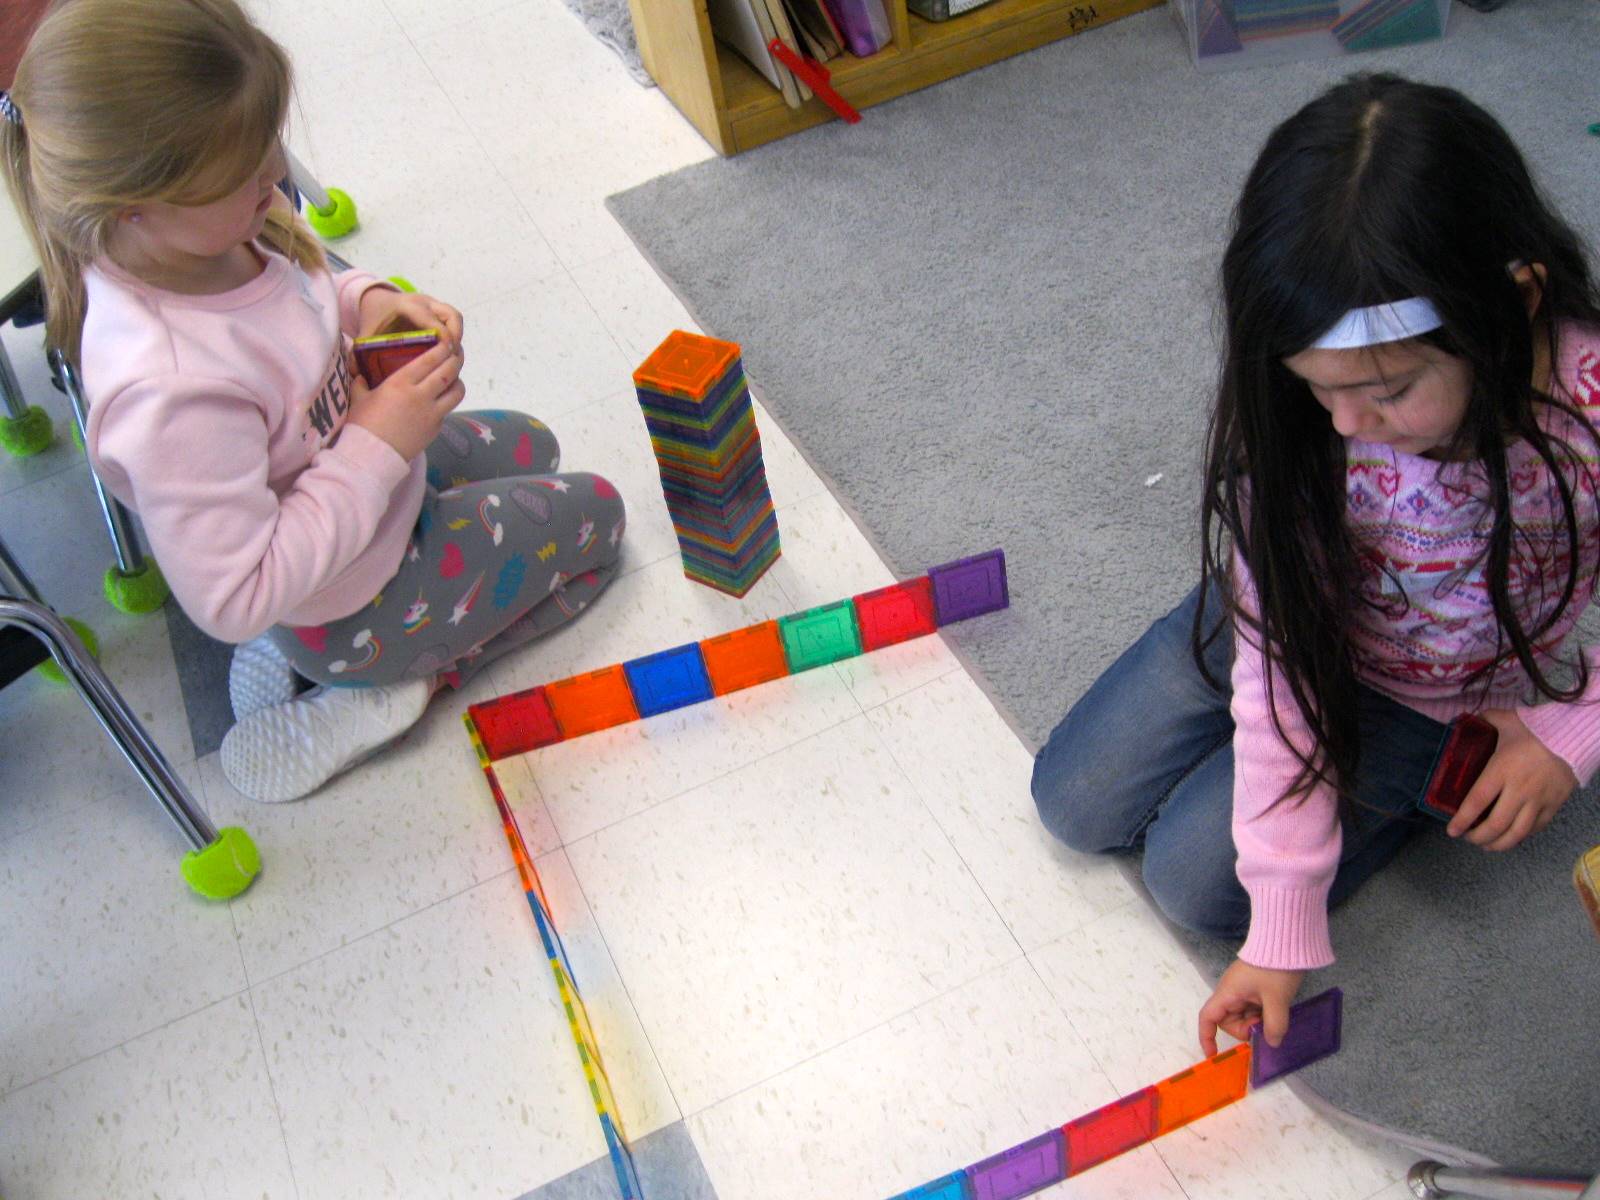 2 students build with colored blocks.